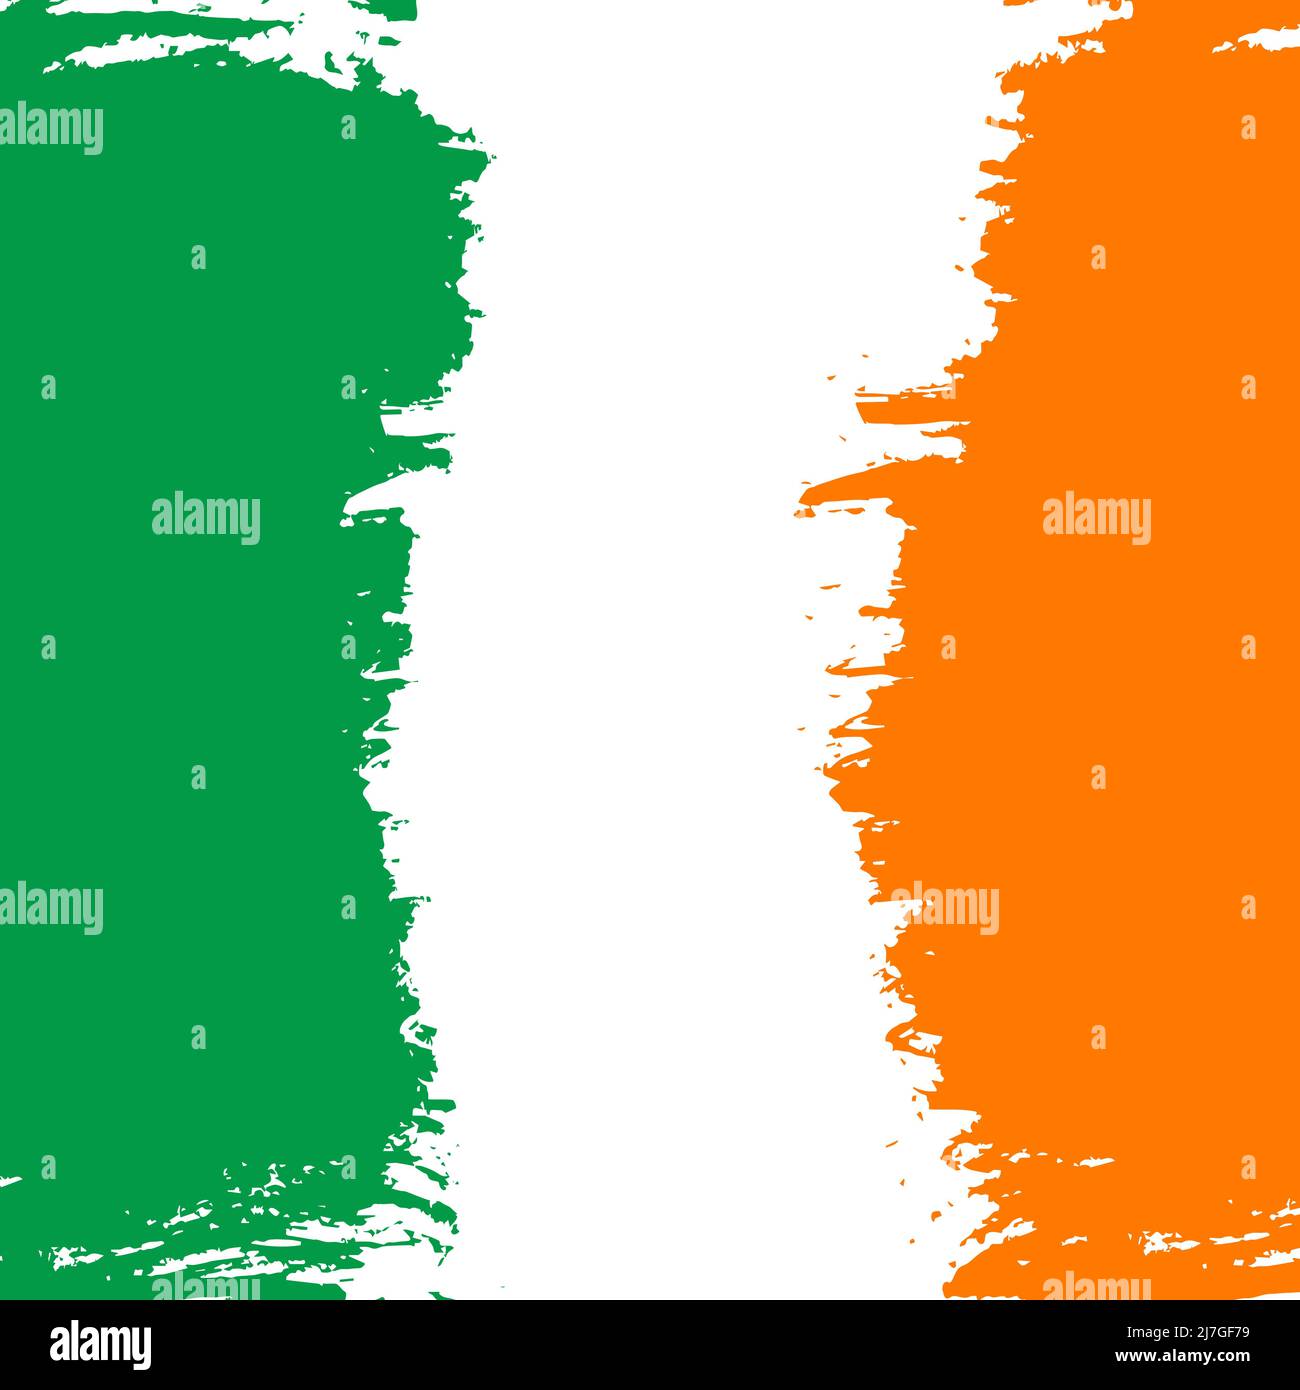 Ireland flag with brush stokes in national colors green, white and orange, abstract background. Vector illustration Stock Vector